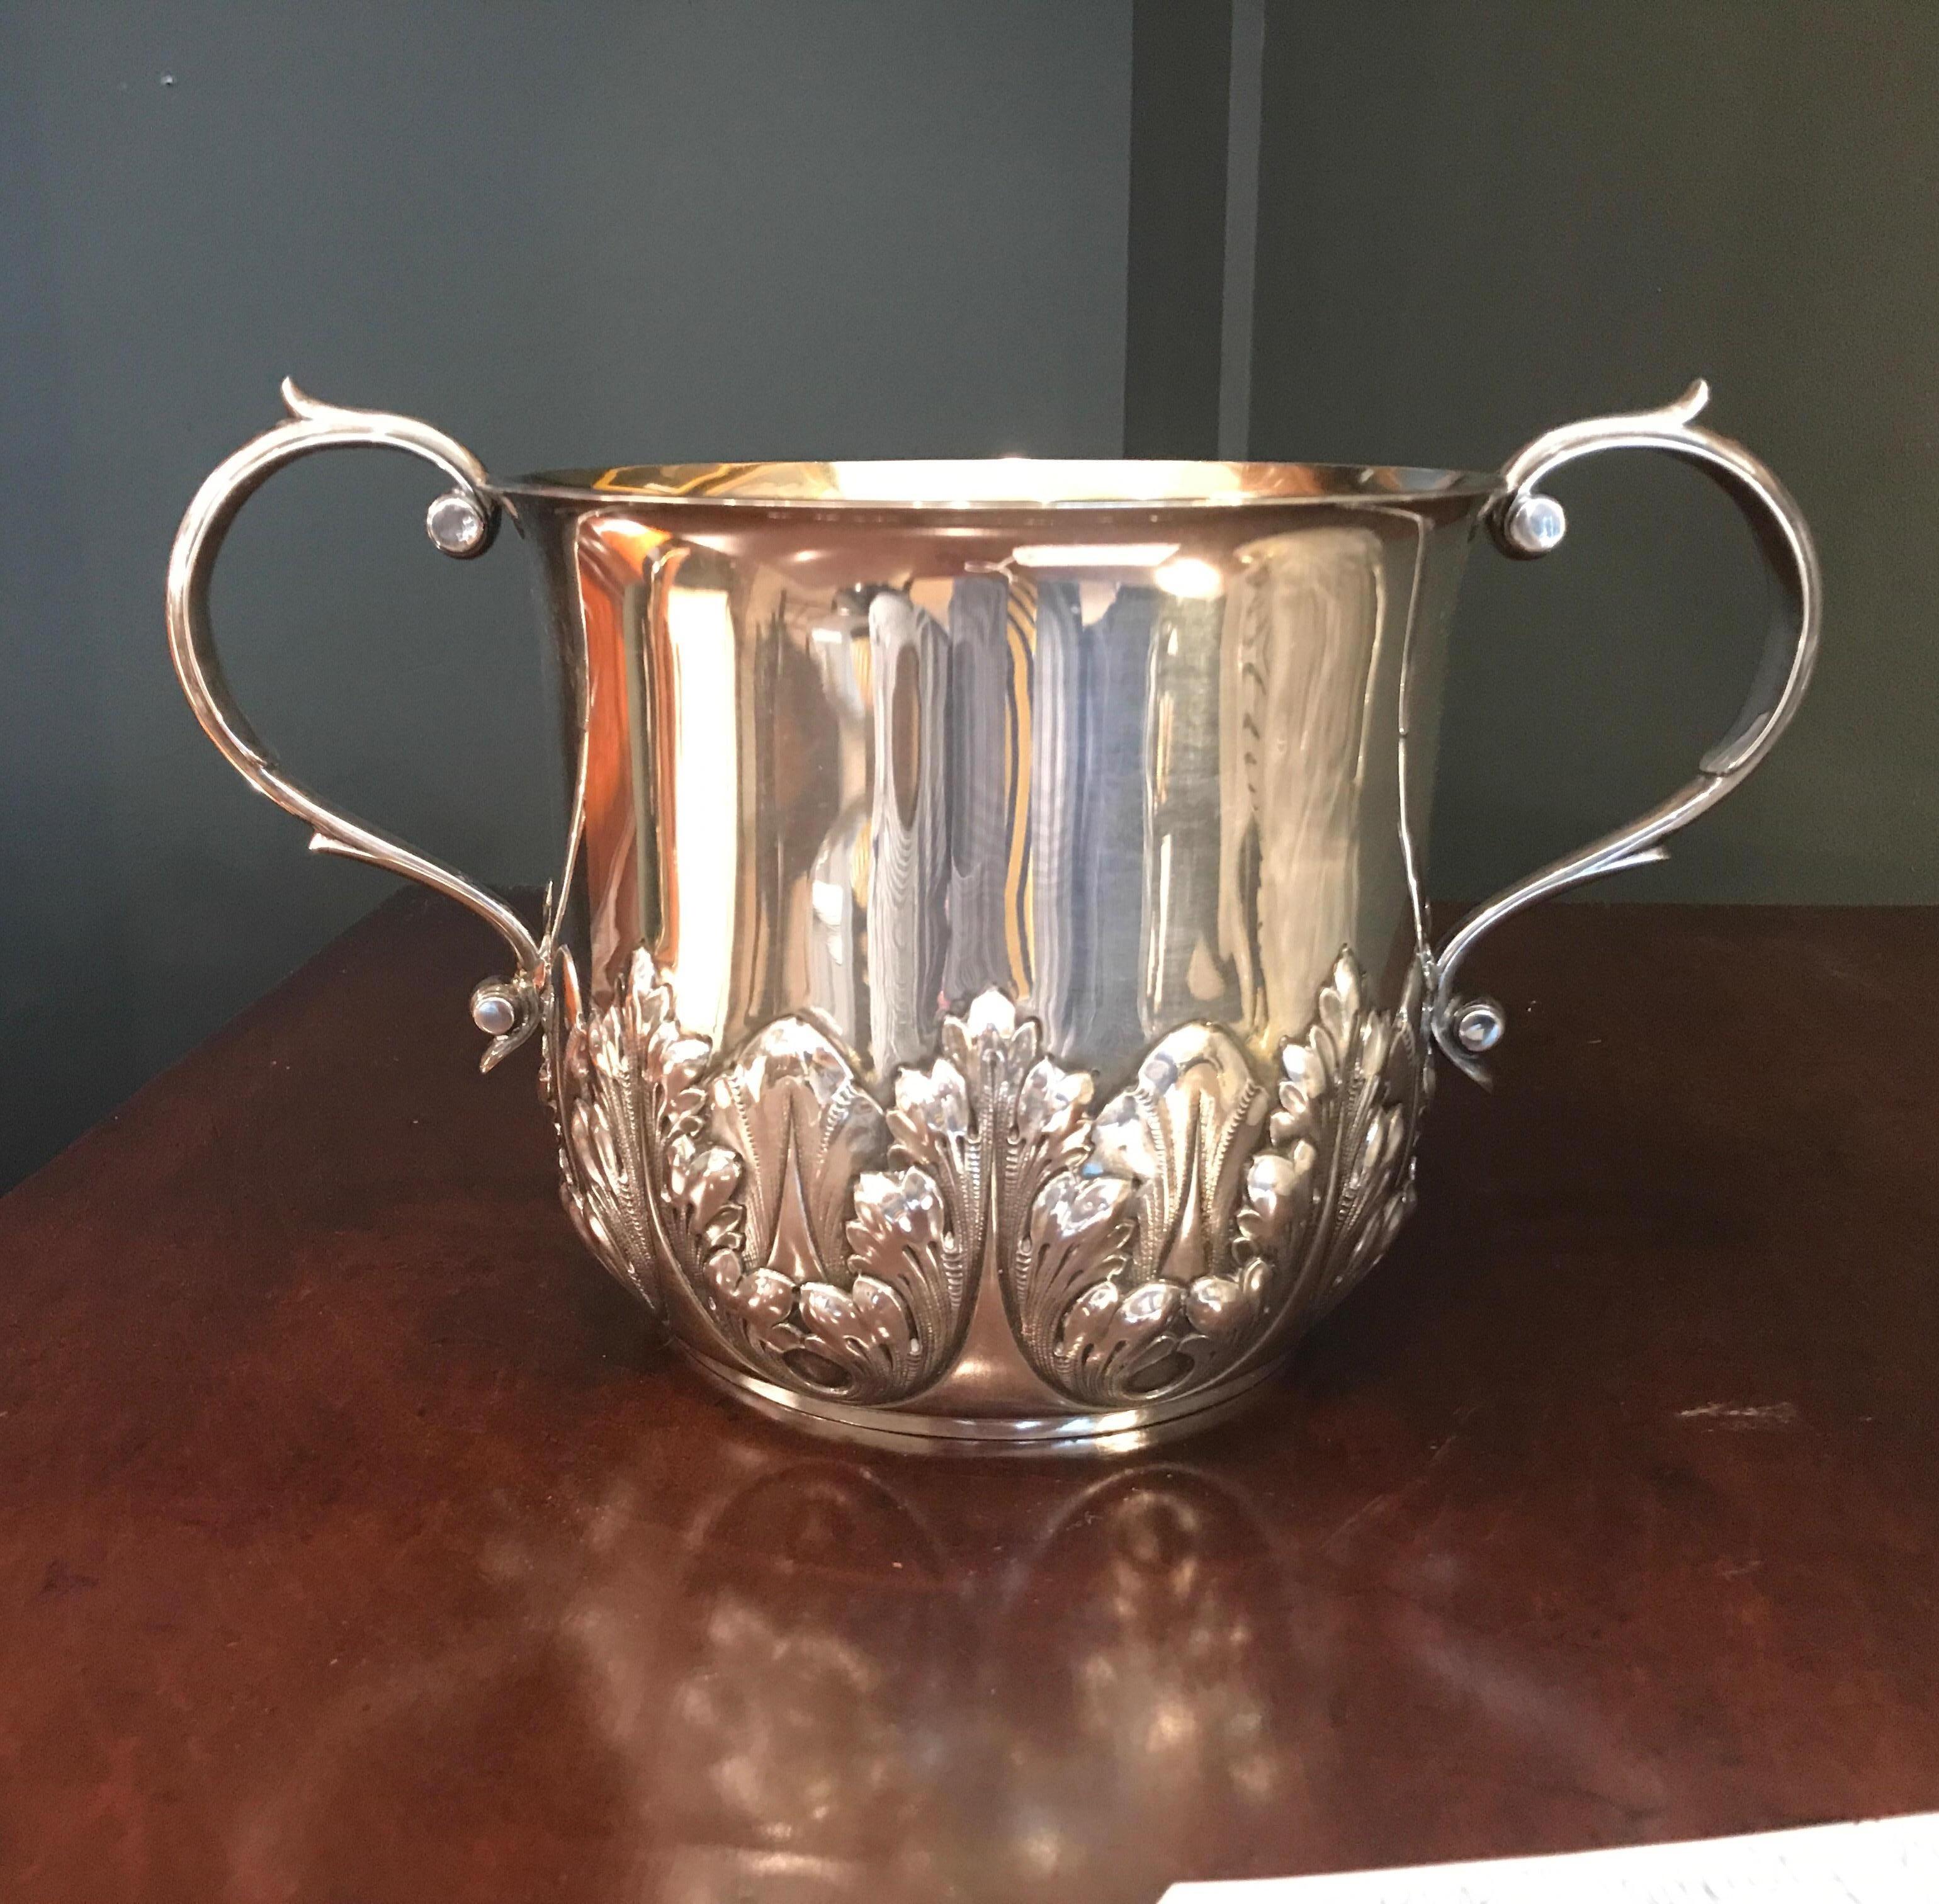 Elegant late 19th century sterling silver loving cup form ice bucket by Dominick and Haff New York. The swan neck handles with smooth upper body with acanthus leaf reposse bottom. A nice sized Ice bucket or a smaller sized whine coole at just under